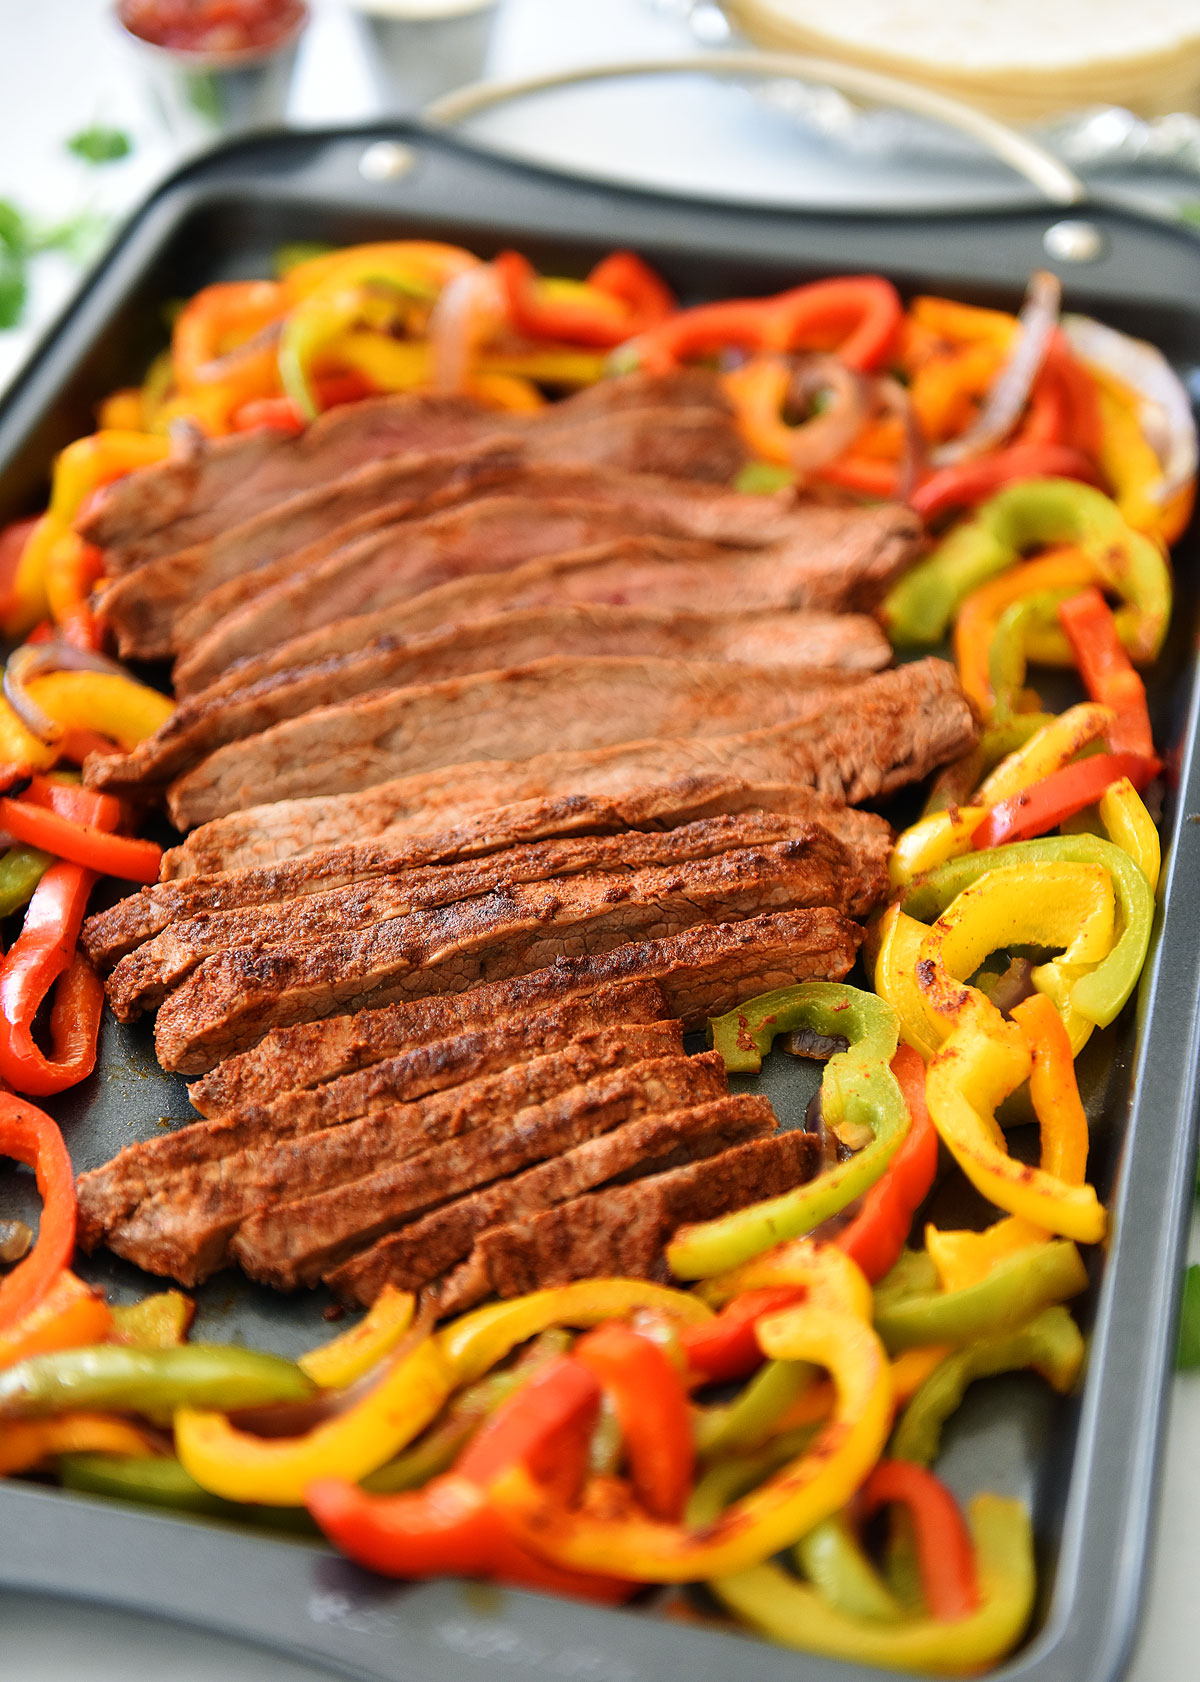 Sheet Pan Steak Fajitas are just like classic fajitas with grilled onions, bell peppers and steak. Life-in-the-Lofthouse.com